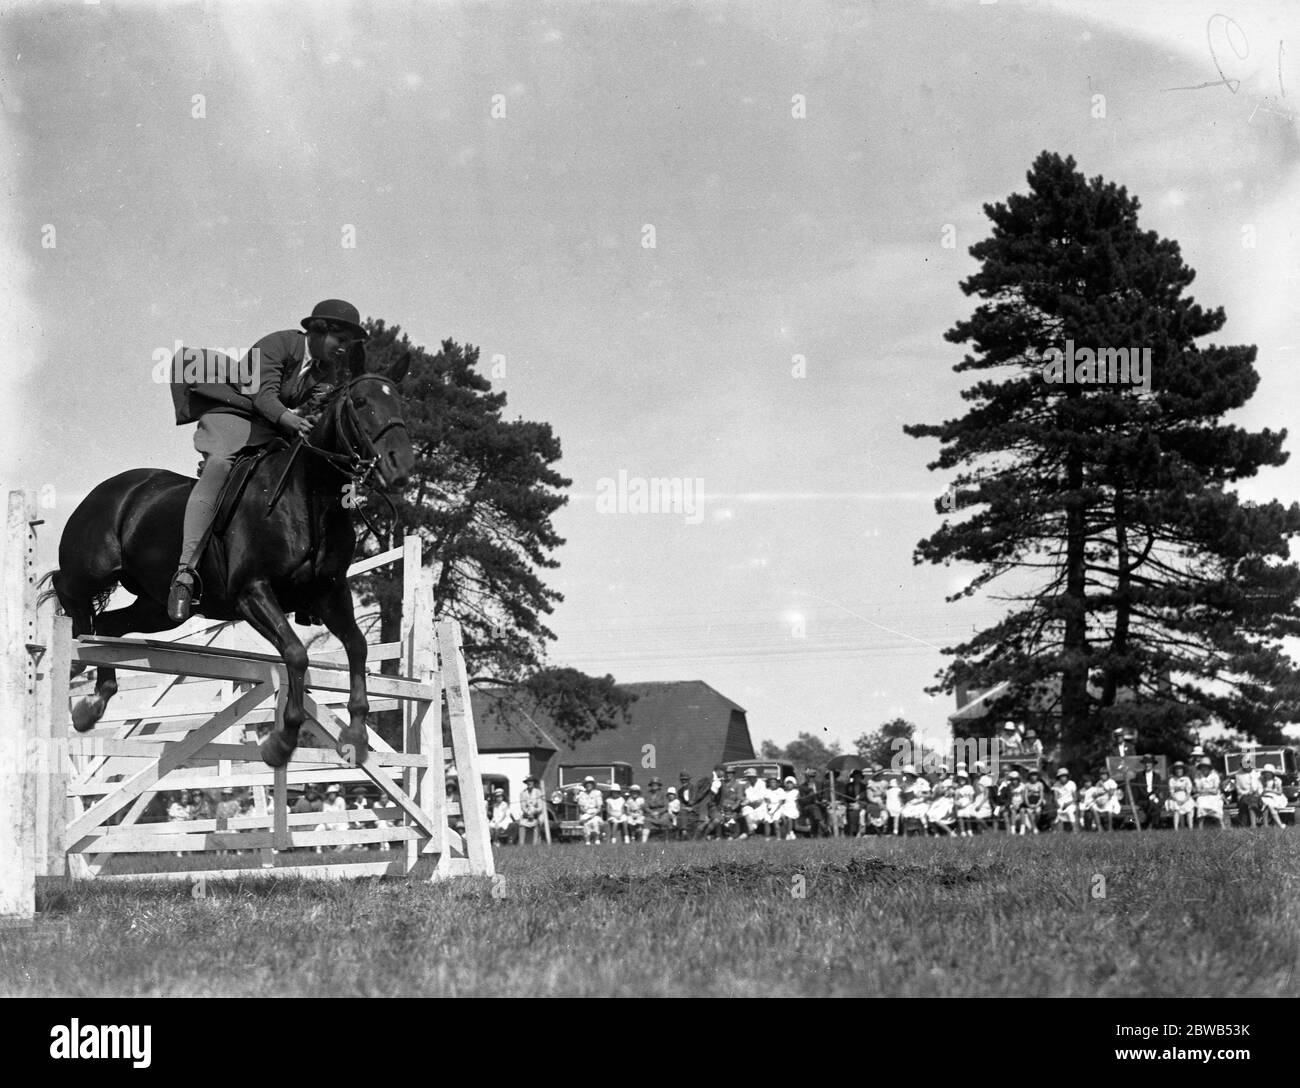 Woman horse riding archive Black and White Stock Photos & Images - Alamy